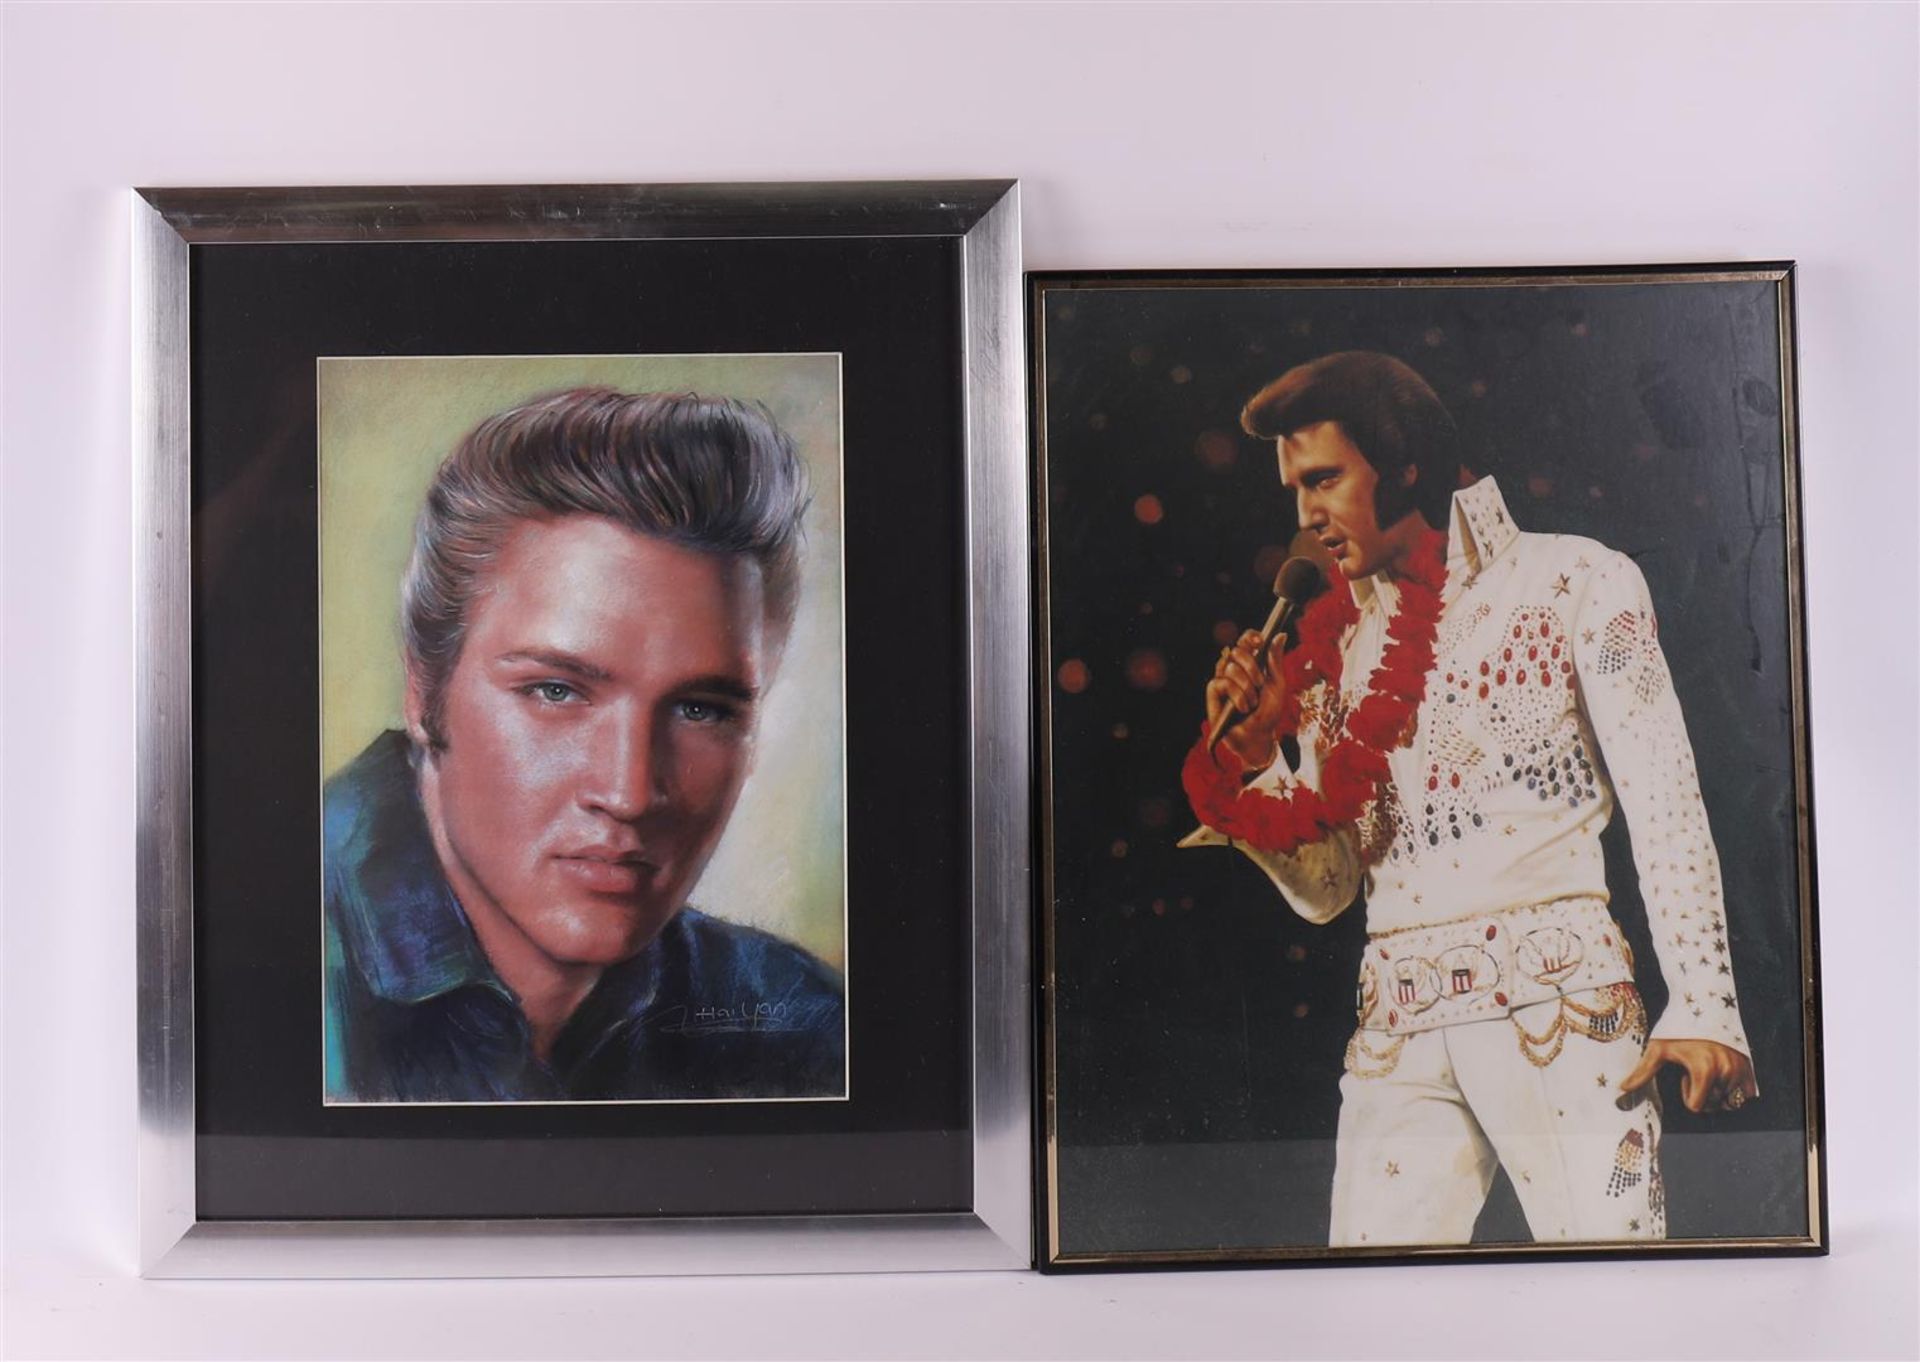 A lot of various Elvis Presley memorablia, posters and puzzles as posters. - Image 3 of 4